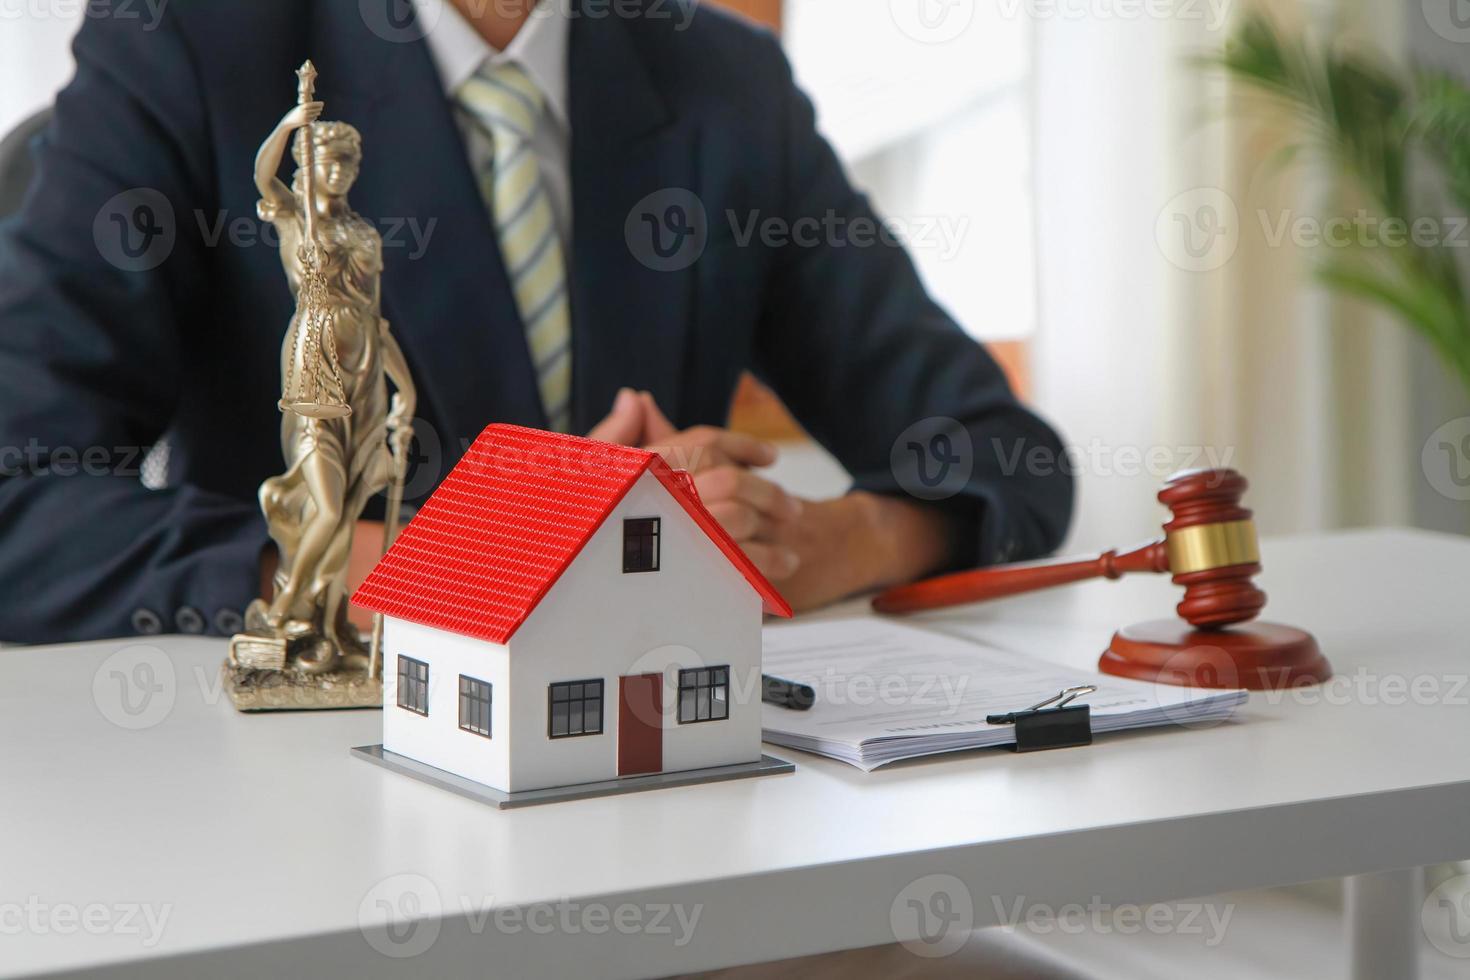 Law, Counsel, Agreement, Contract, Lawyer, Advising on litigation matters and signing contracts as a lawyer to receive home and land mortgage complaints from customers. concept lawyer photo